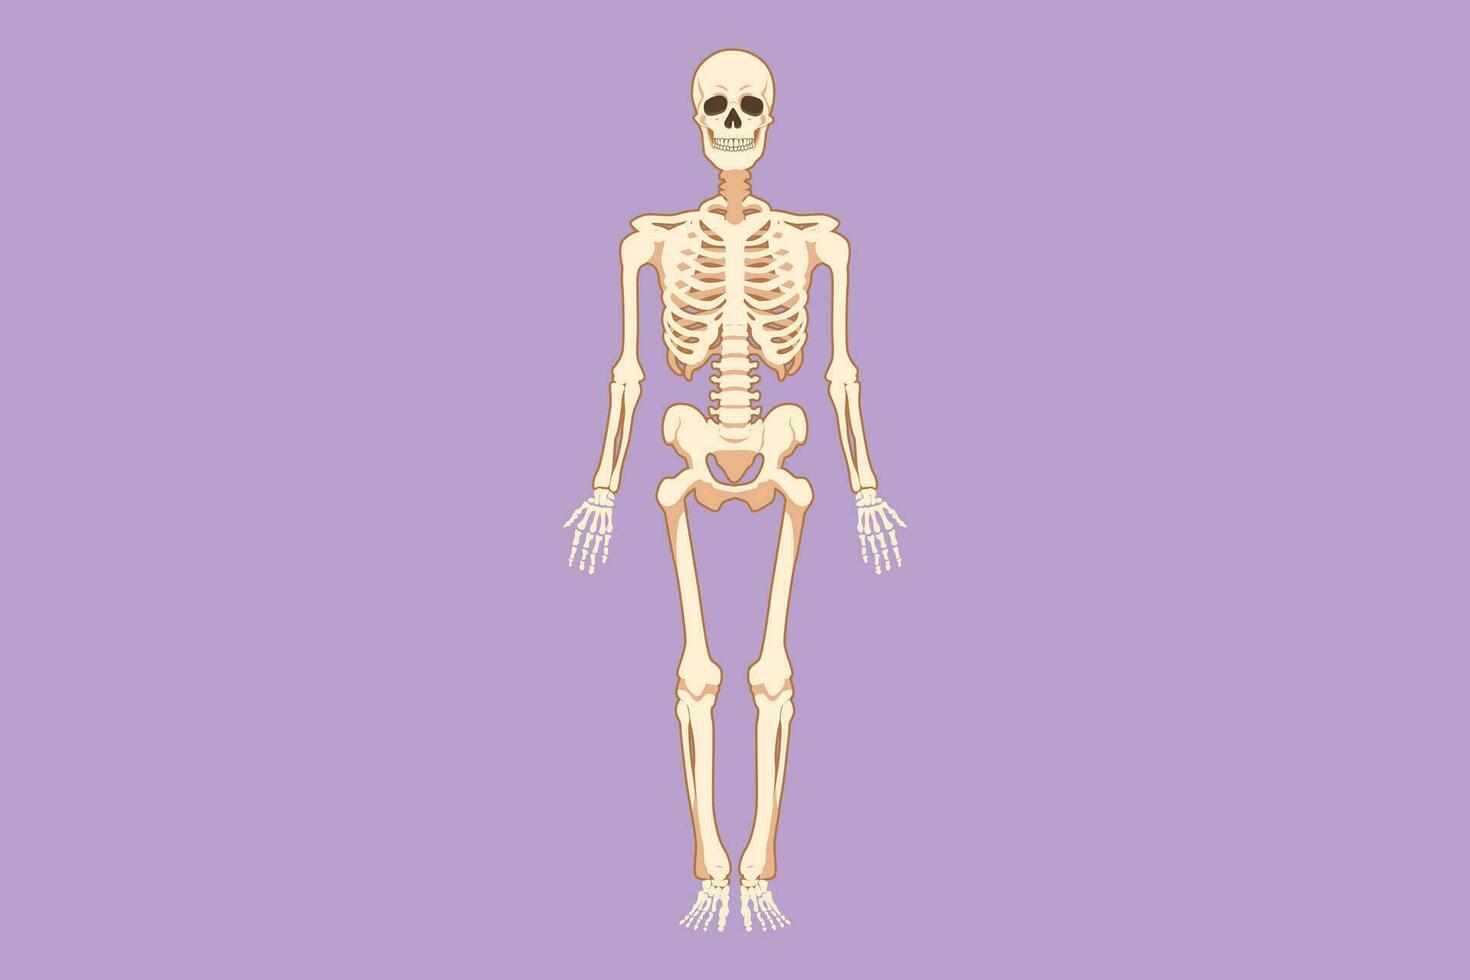 Cartoon flat style drawing front view of human skeleton image logo icon, useful for creating medical and scientific materials. Anatomy, medicine and biology concept. Graphic design vector illustration